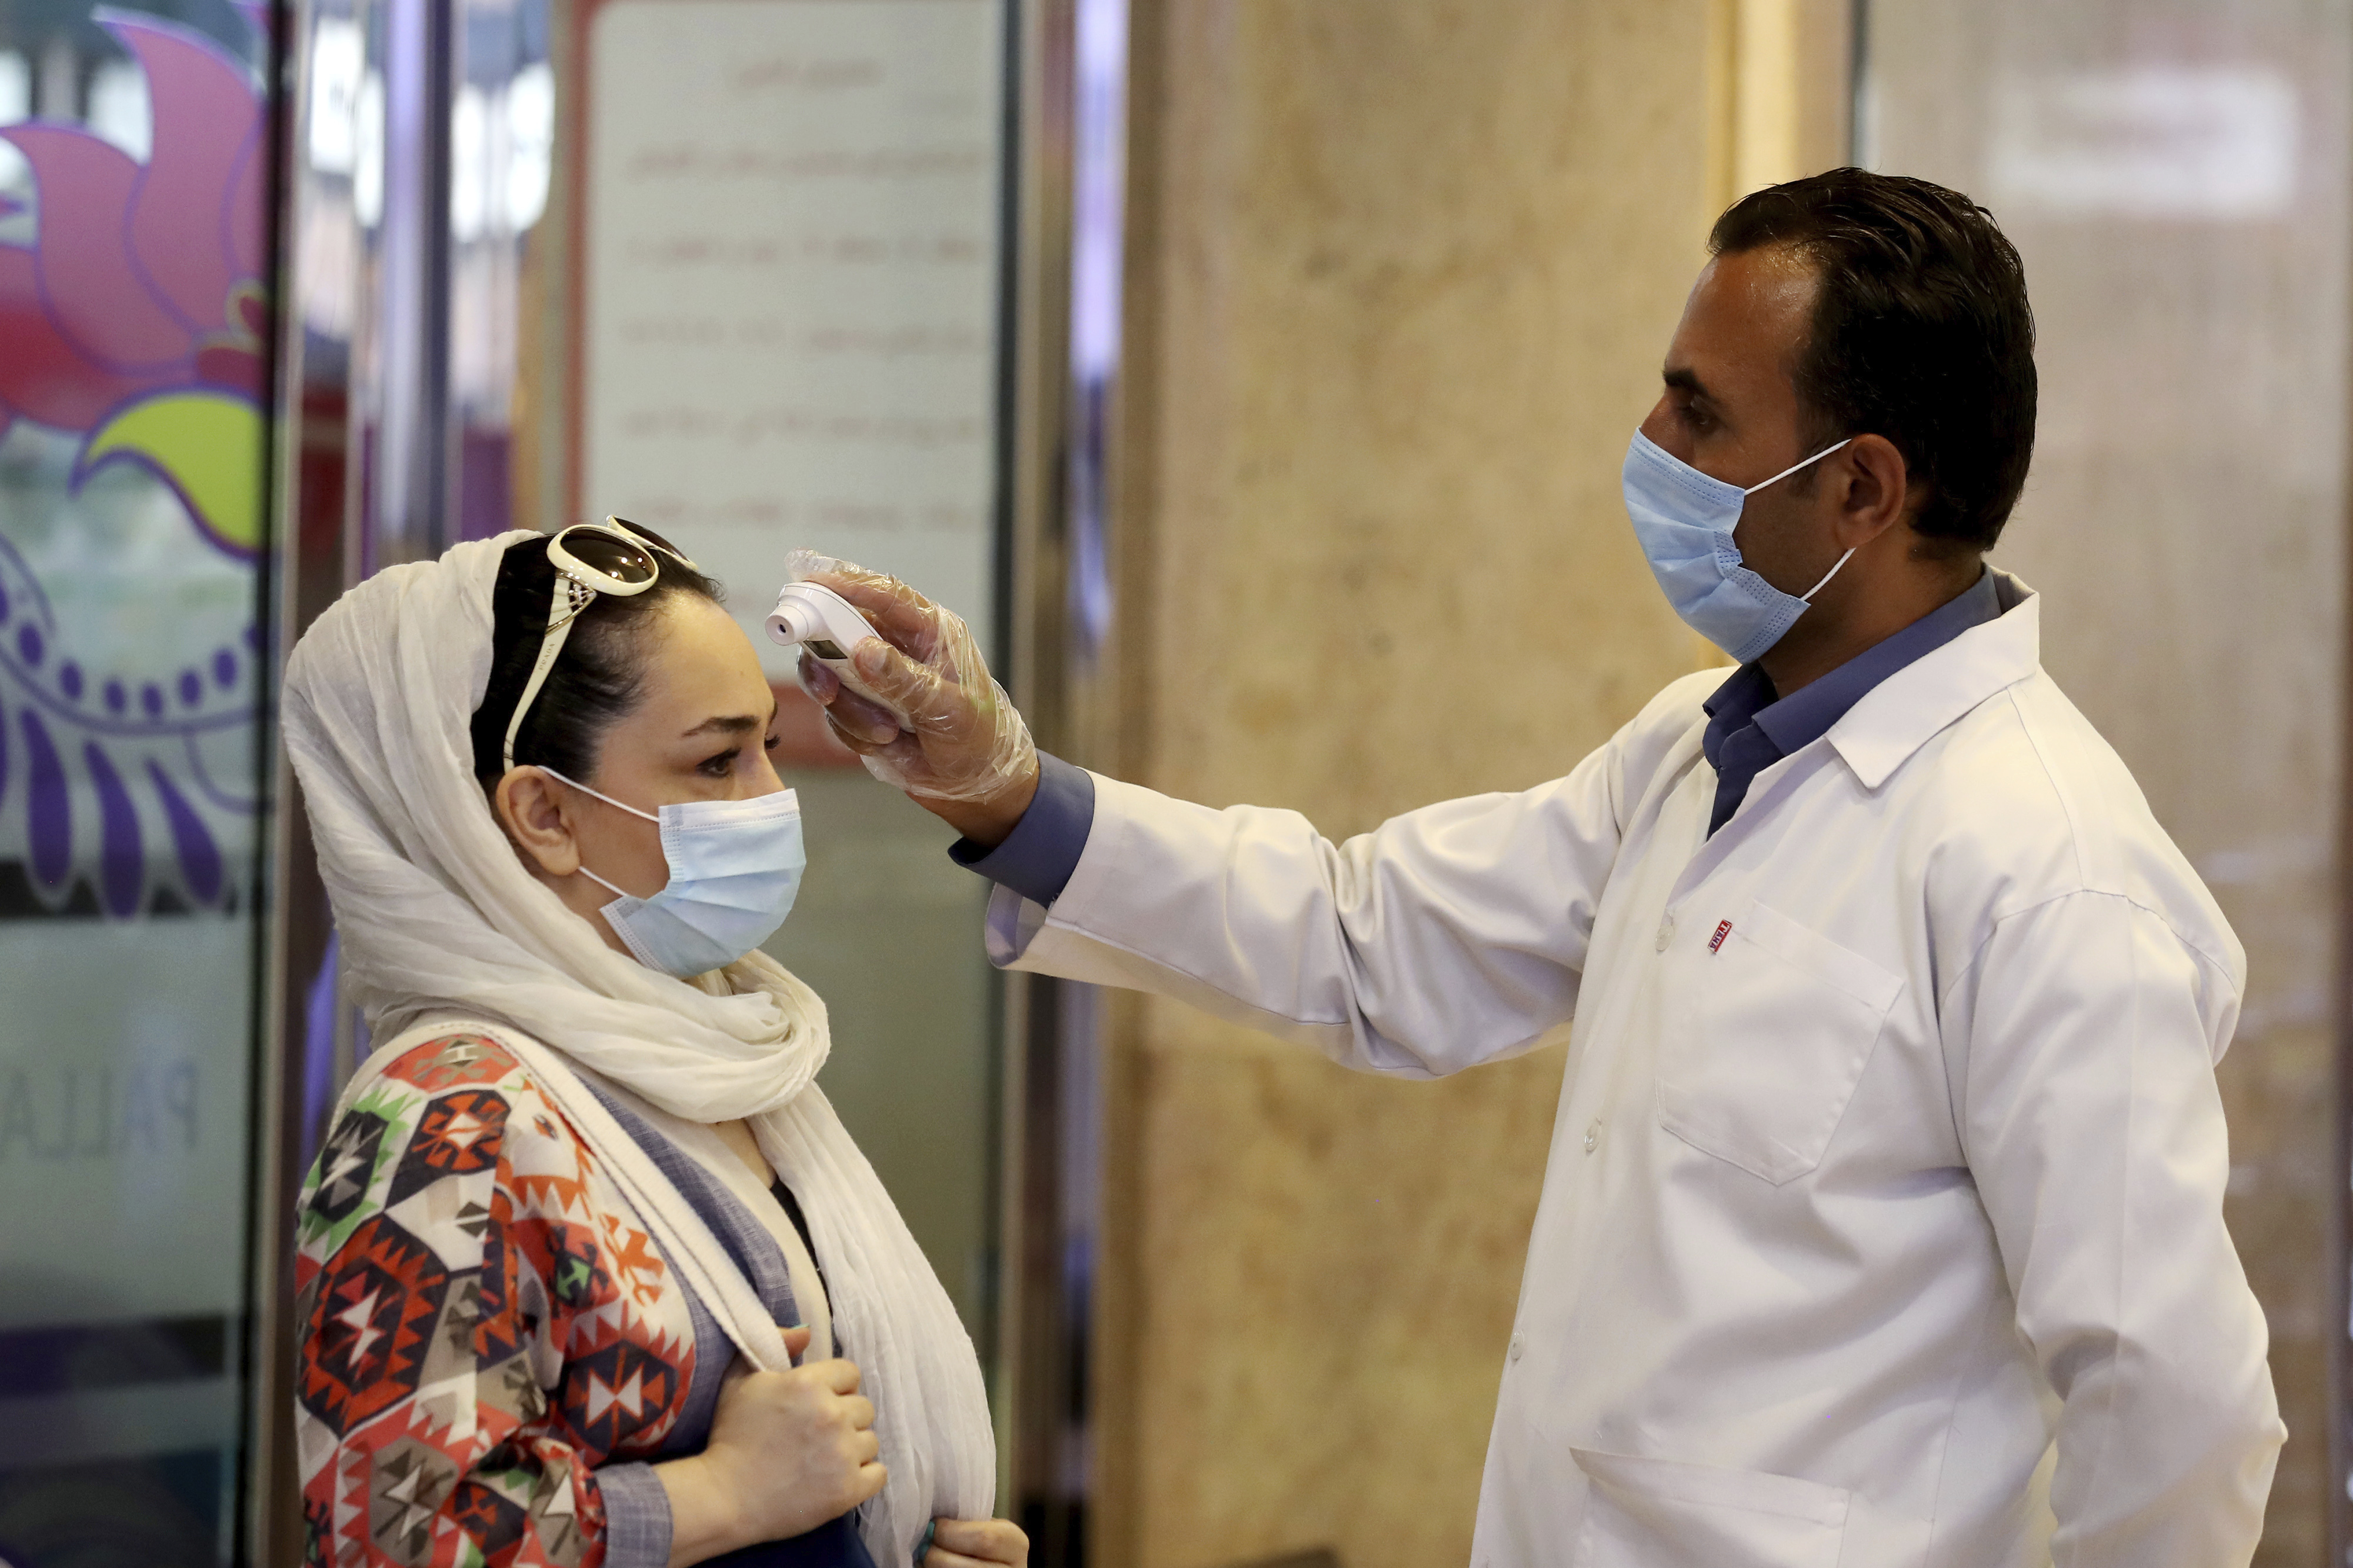 A woman wearing a protective face mask to help prevent spread of the coronavirus has her temperature checked as she enters a shopping center, in Tehran, Iran, Wednesday, Aug. 19, 2020. Iran surpassed 20,000 confirmed deaths from the coronavirus on Wednesday, the health ministry said — the highest death toll for any Middle East country so far in the pandemic. (AP Photo/Ebrahim Noroozi)